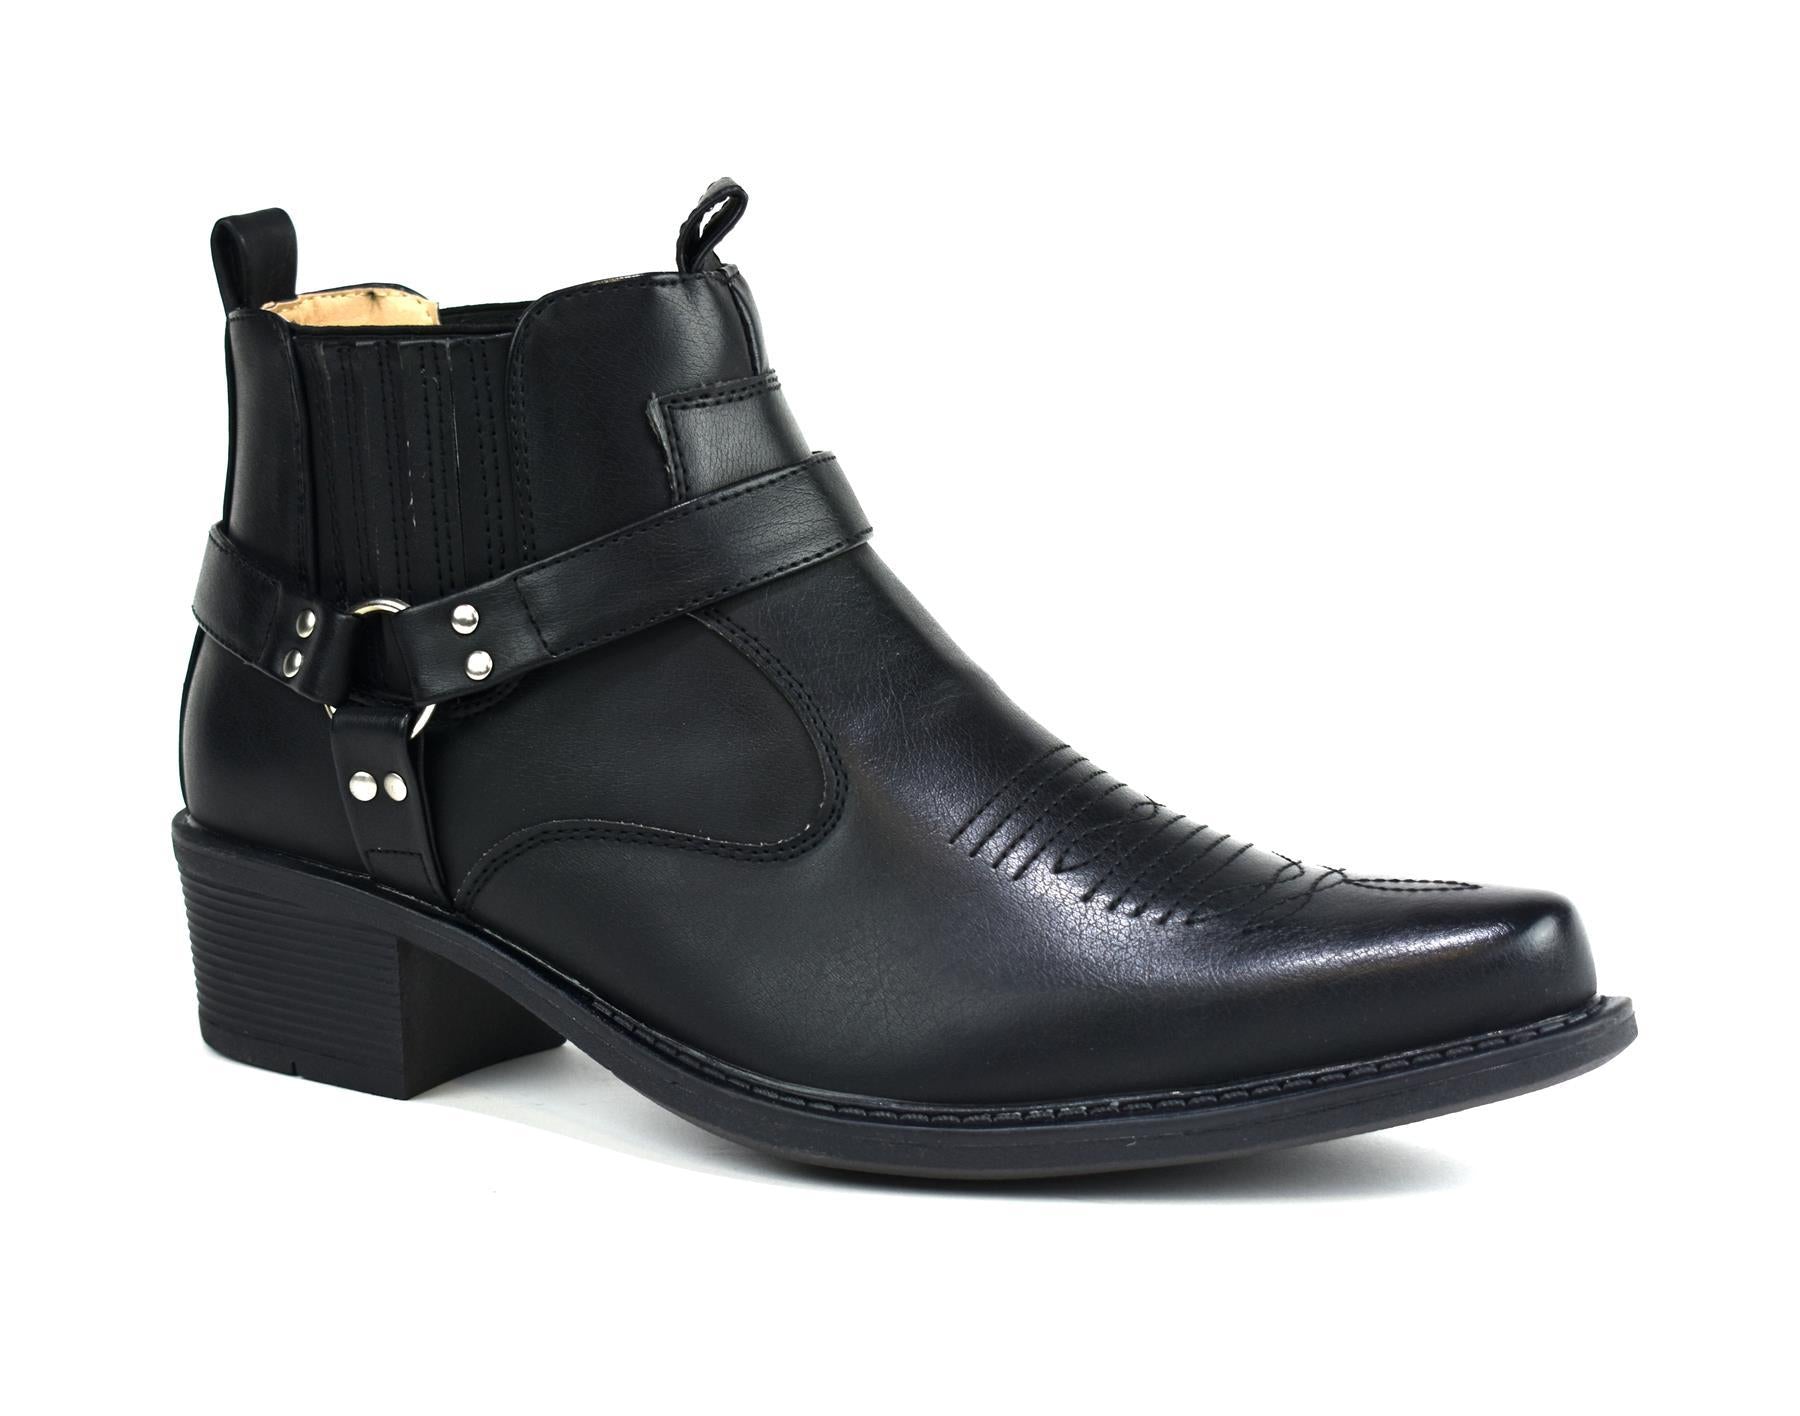 Men's Black Buckle Boots side view two